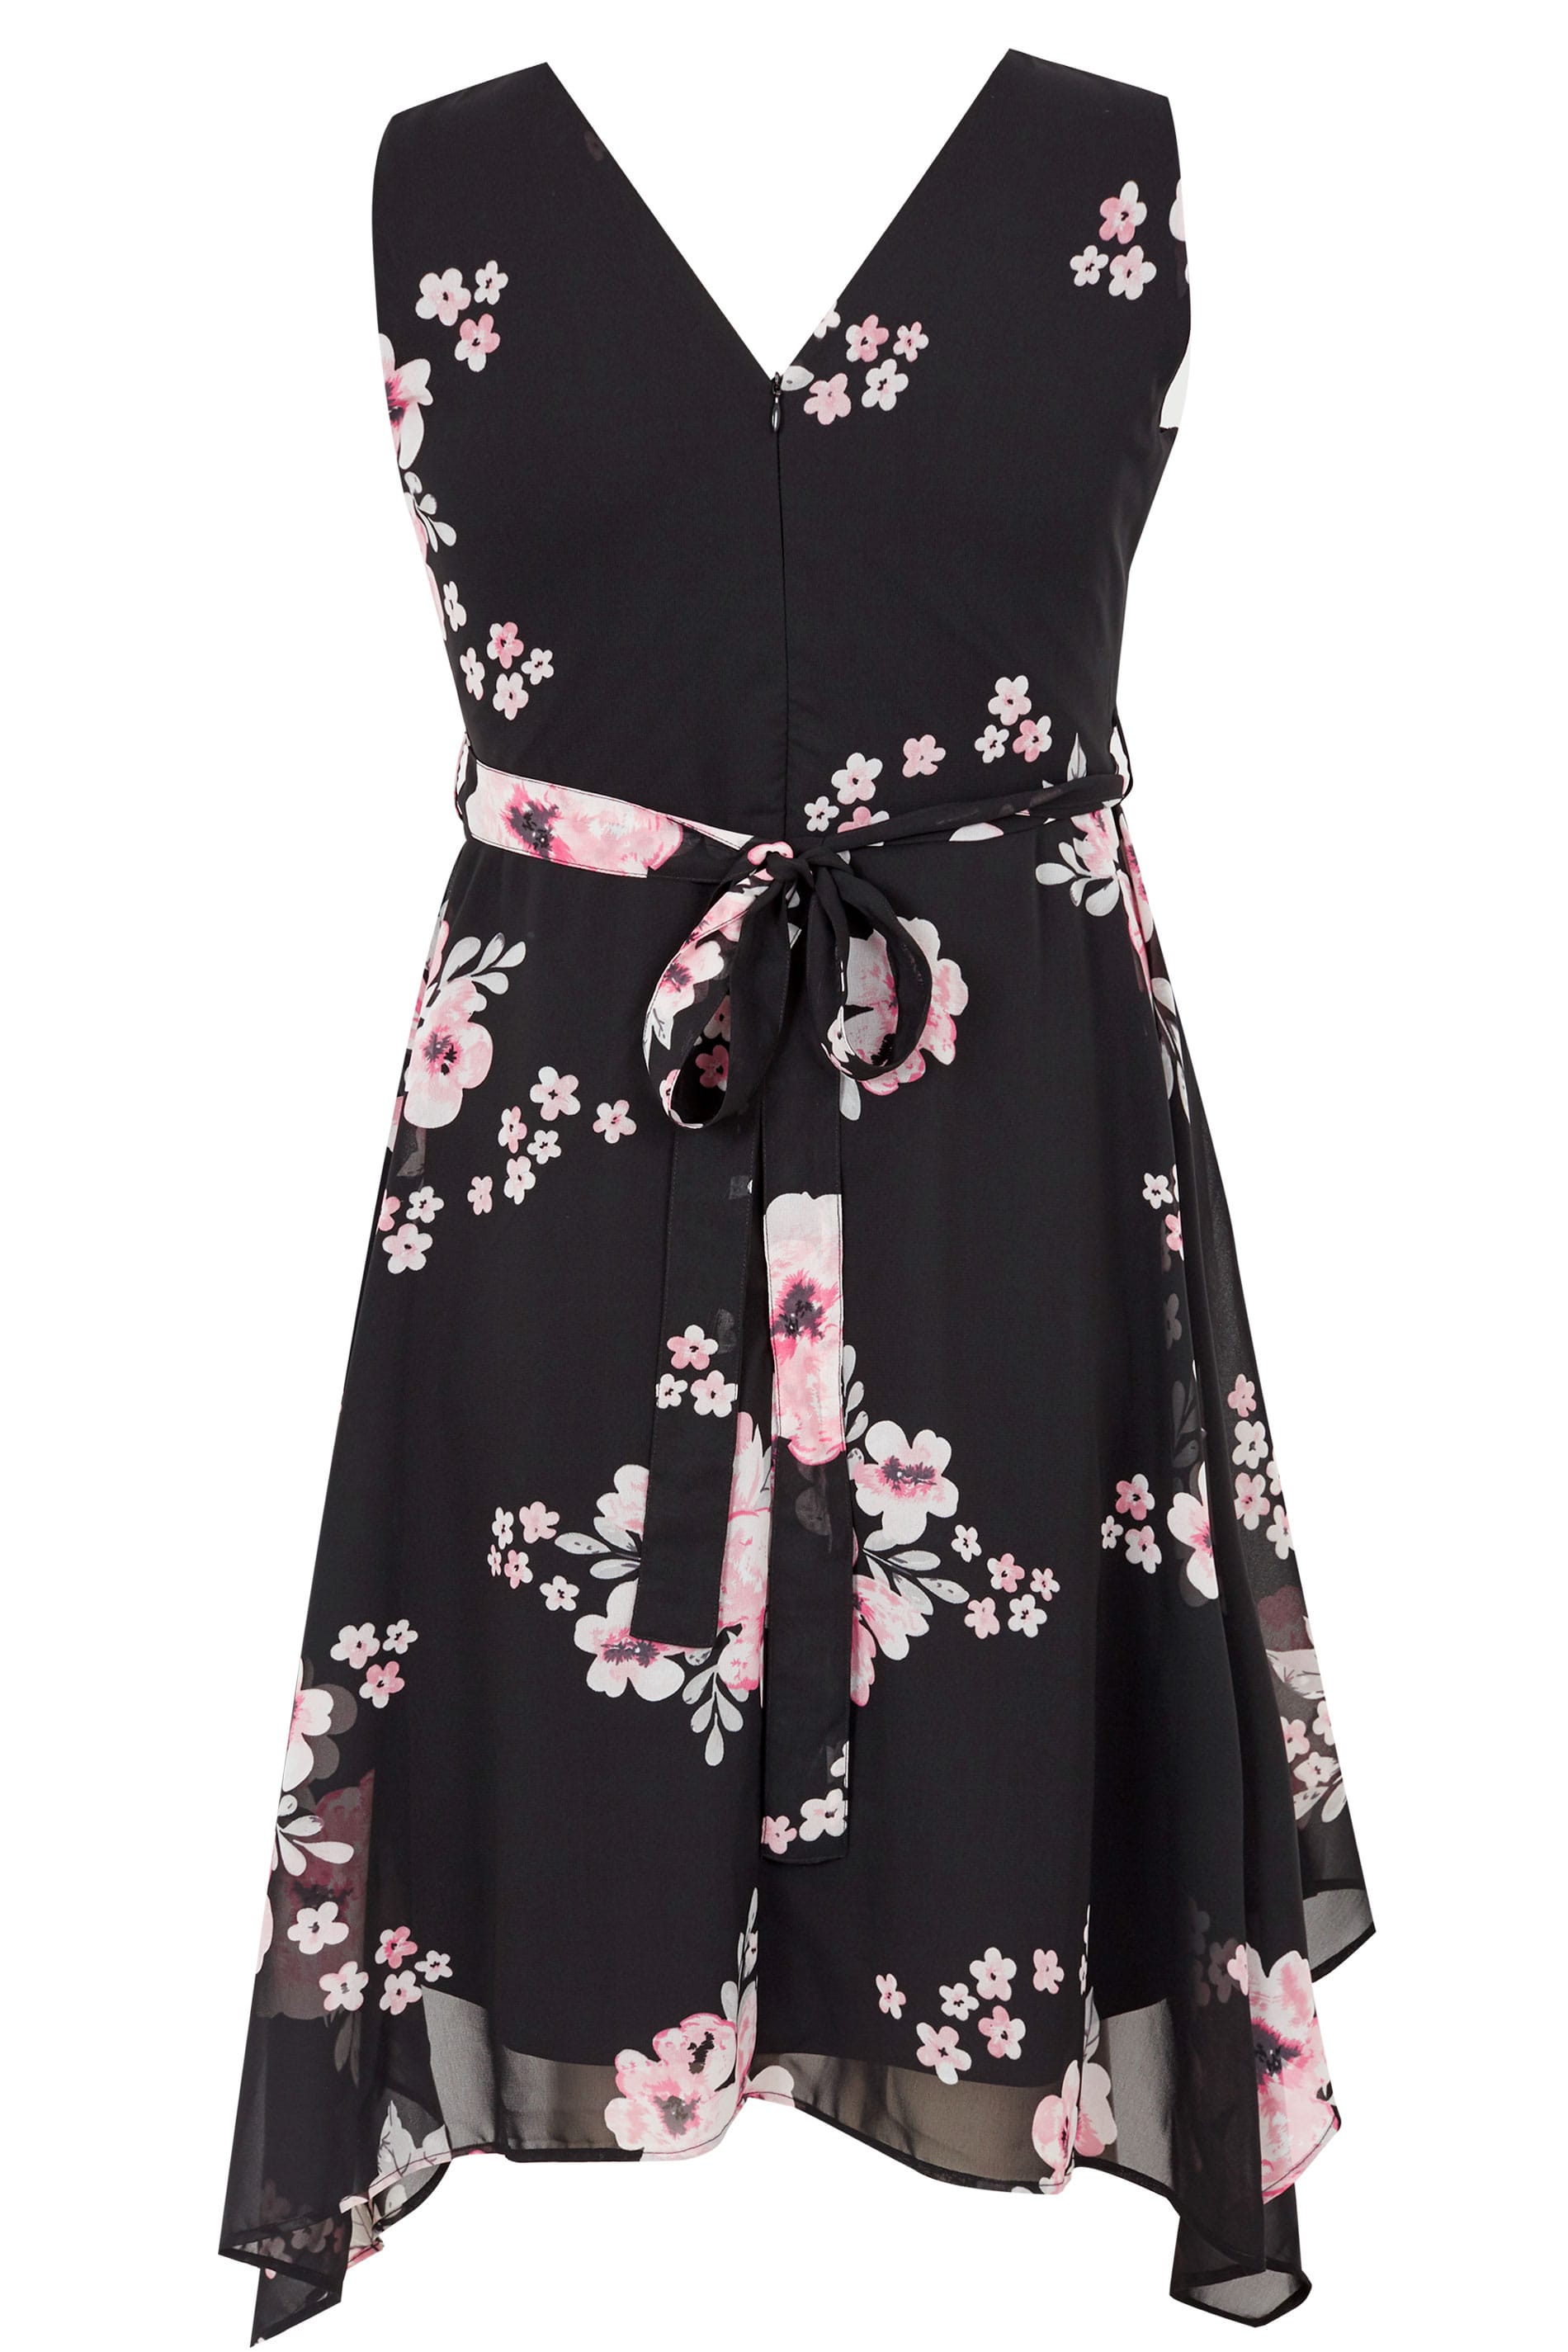 Plus Size Black & Pink Floral Wrap Dress With Hanky Hem | Sizes 16 to ...